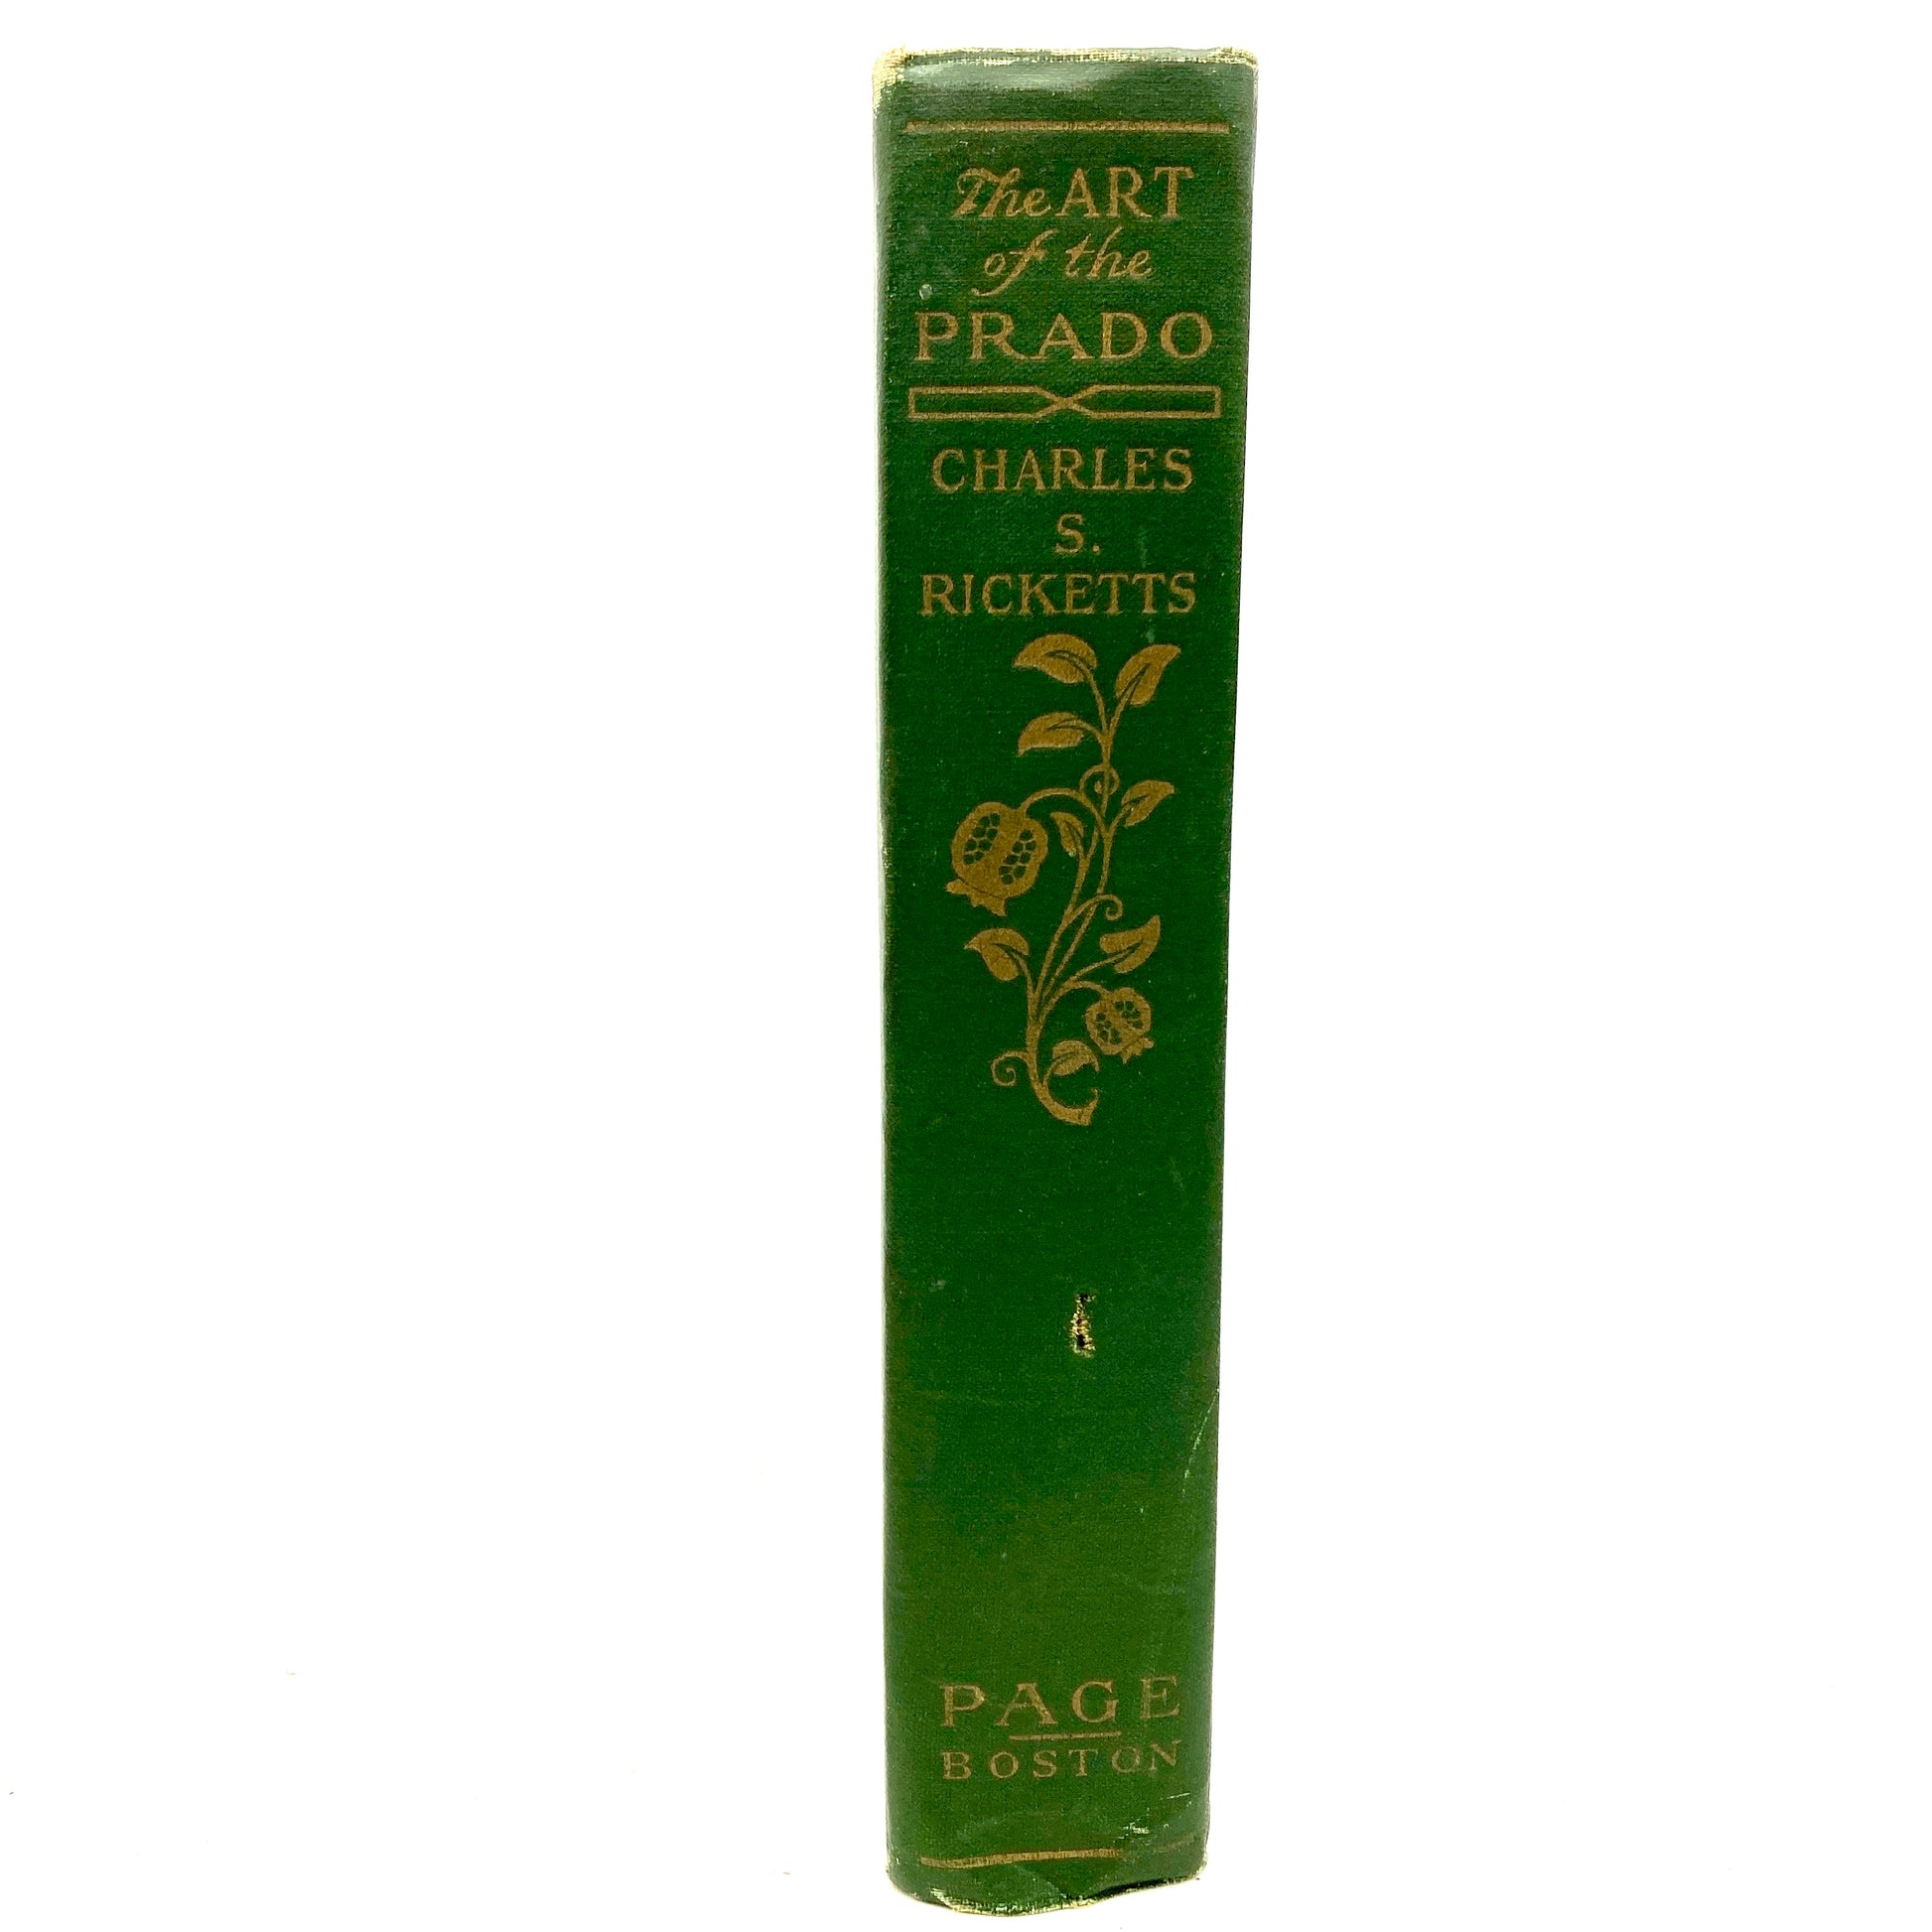 RICKETTS, C.S. "The Art of the Prado" [L.C. Page, 1907] 1st Edition/1st Print - Buzz Bookstore